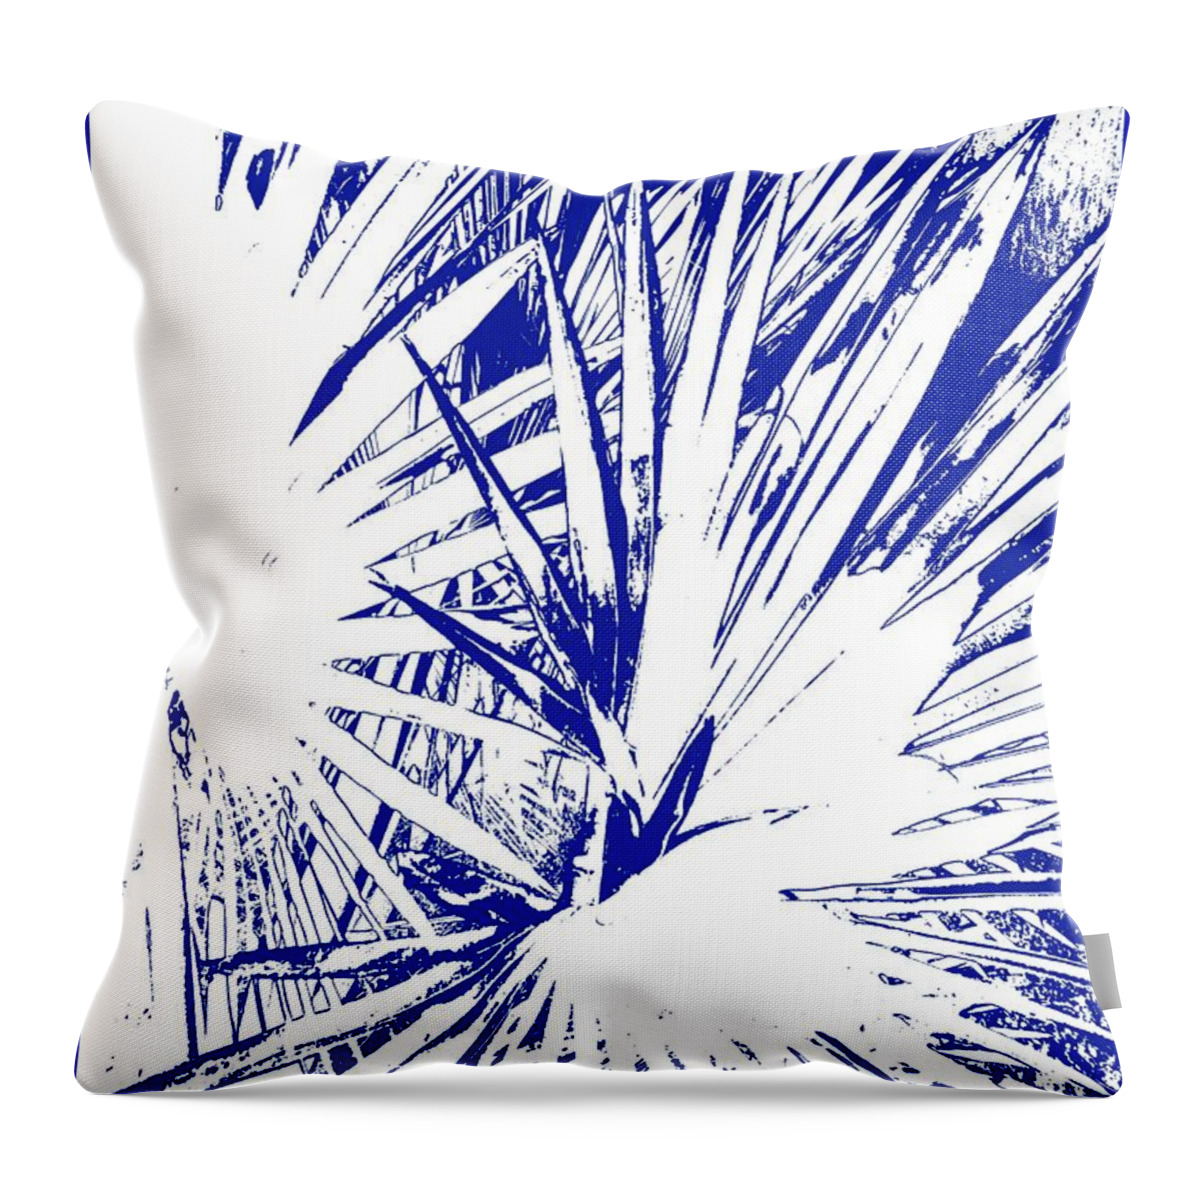 Fan Palms Throw Pillow featuring the photograph Fan Palms - Blue-white Abstract by VIVA Anderson